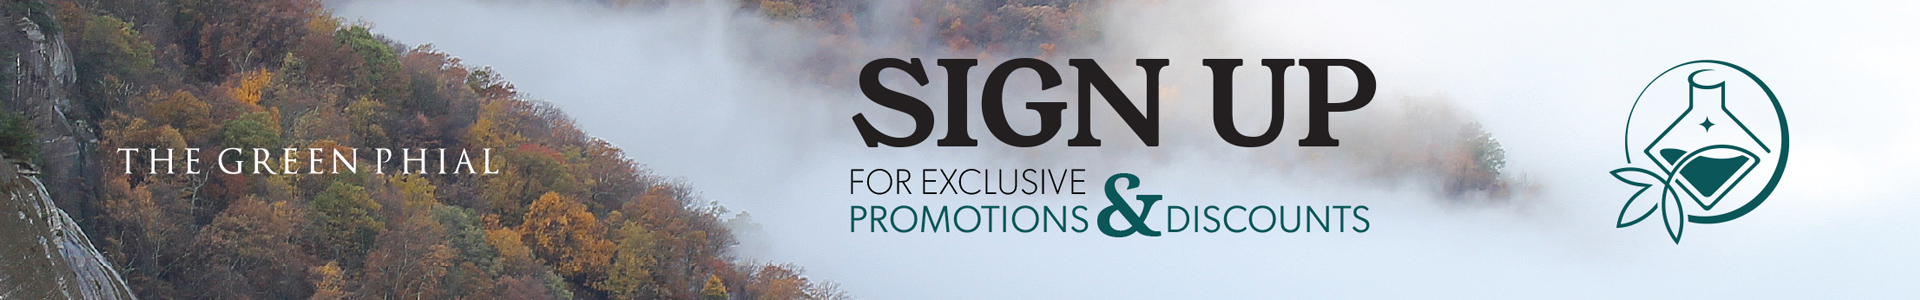 Sign up for exclusive promotions and discounts on TCHv, CBC, and other products.